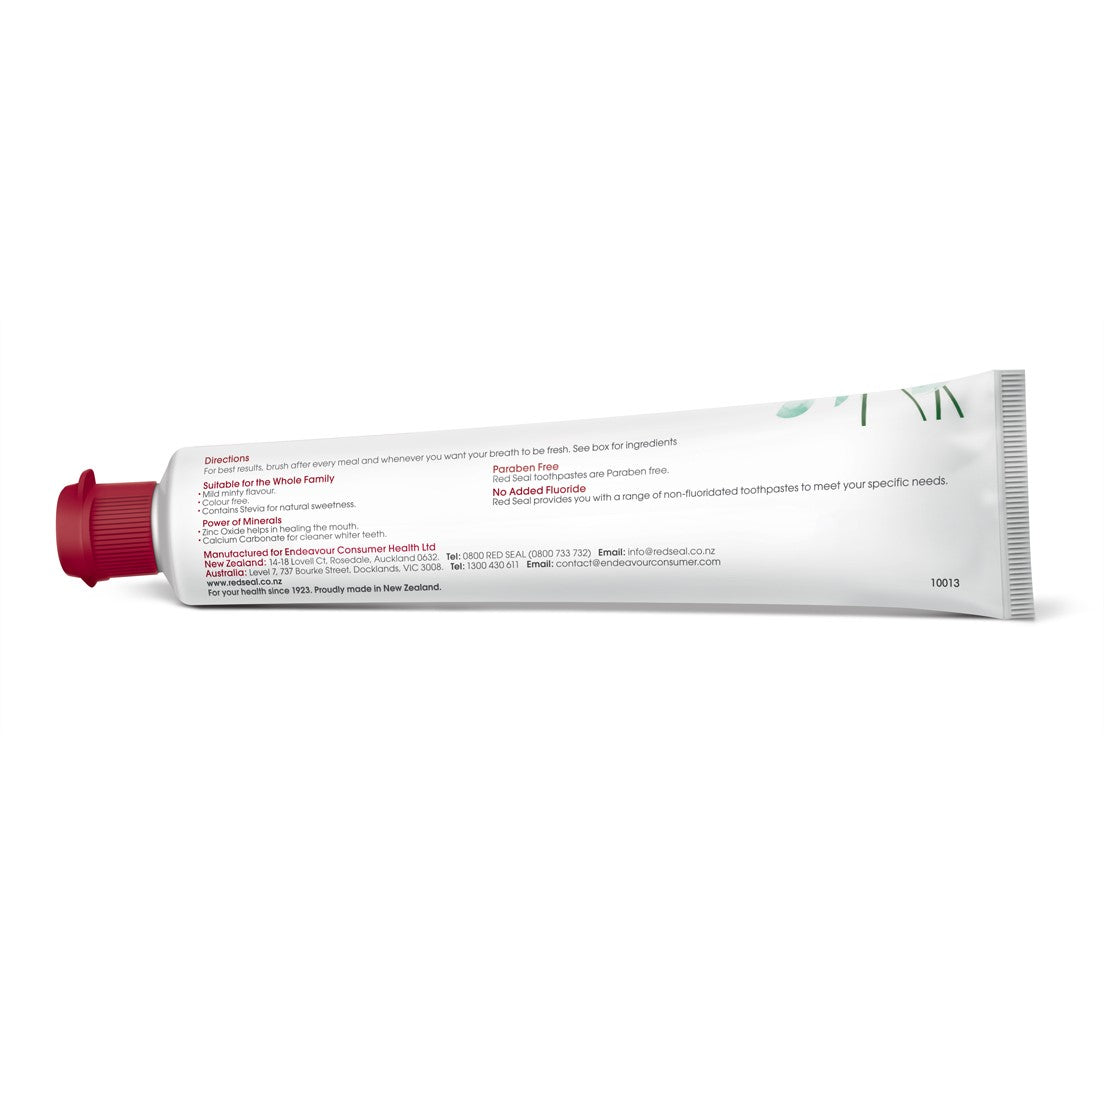 Red Seal Toothpaste 110g, Natural With Mild Mint